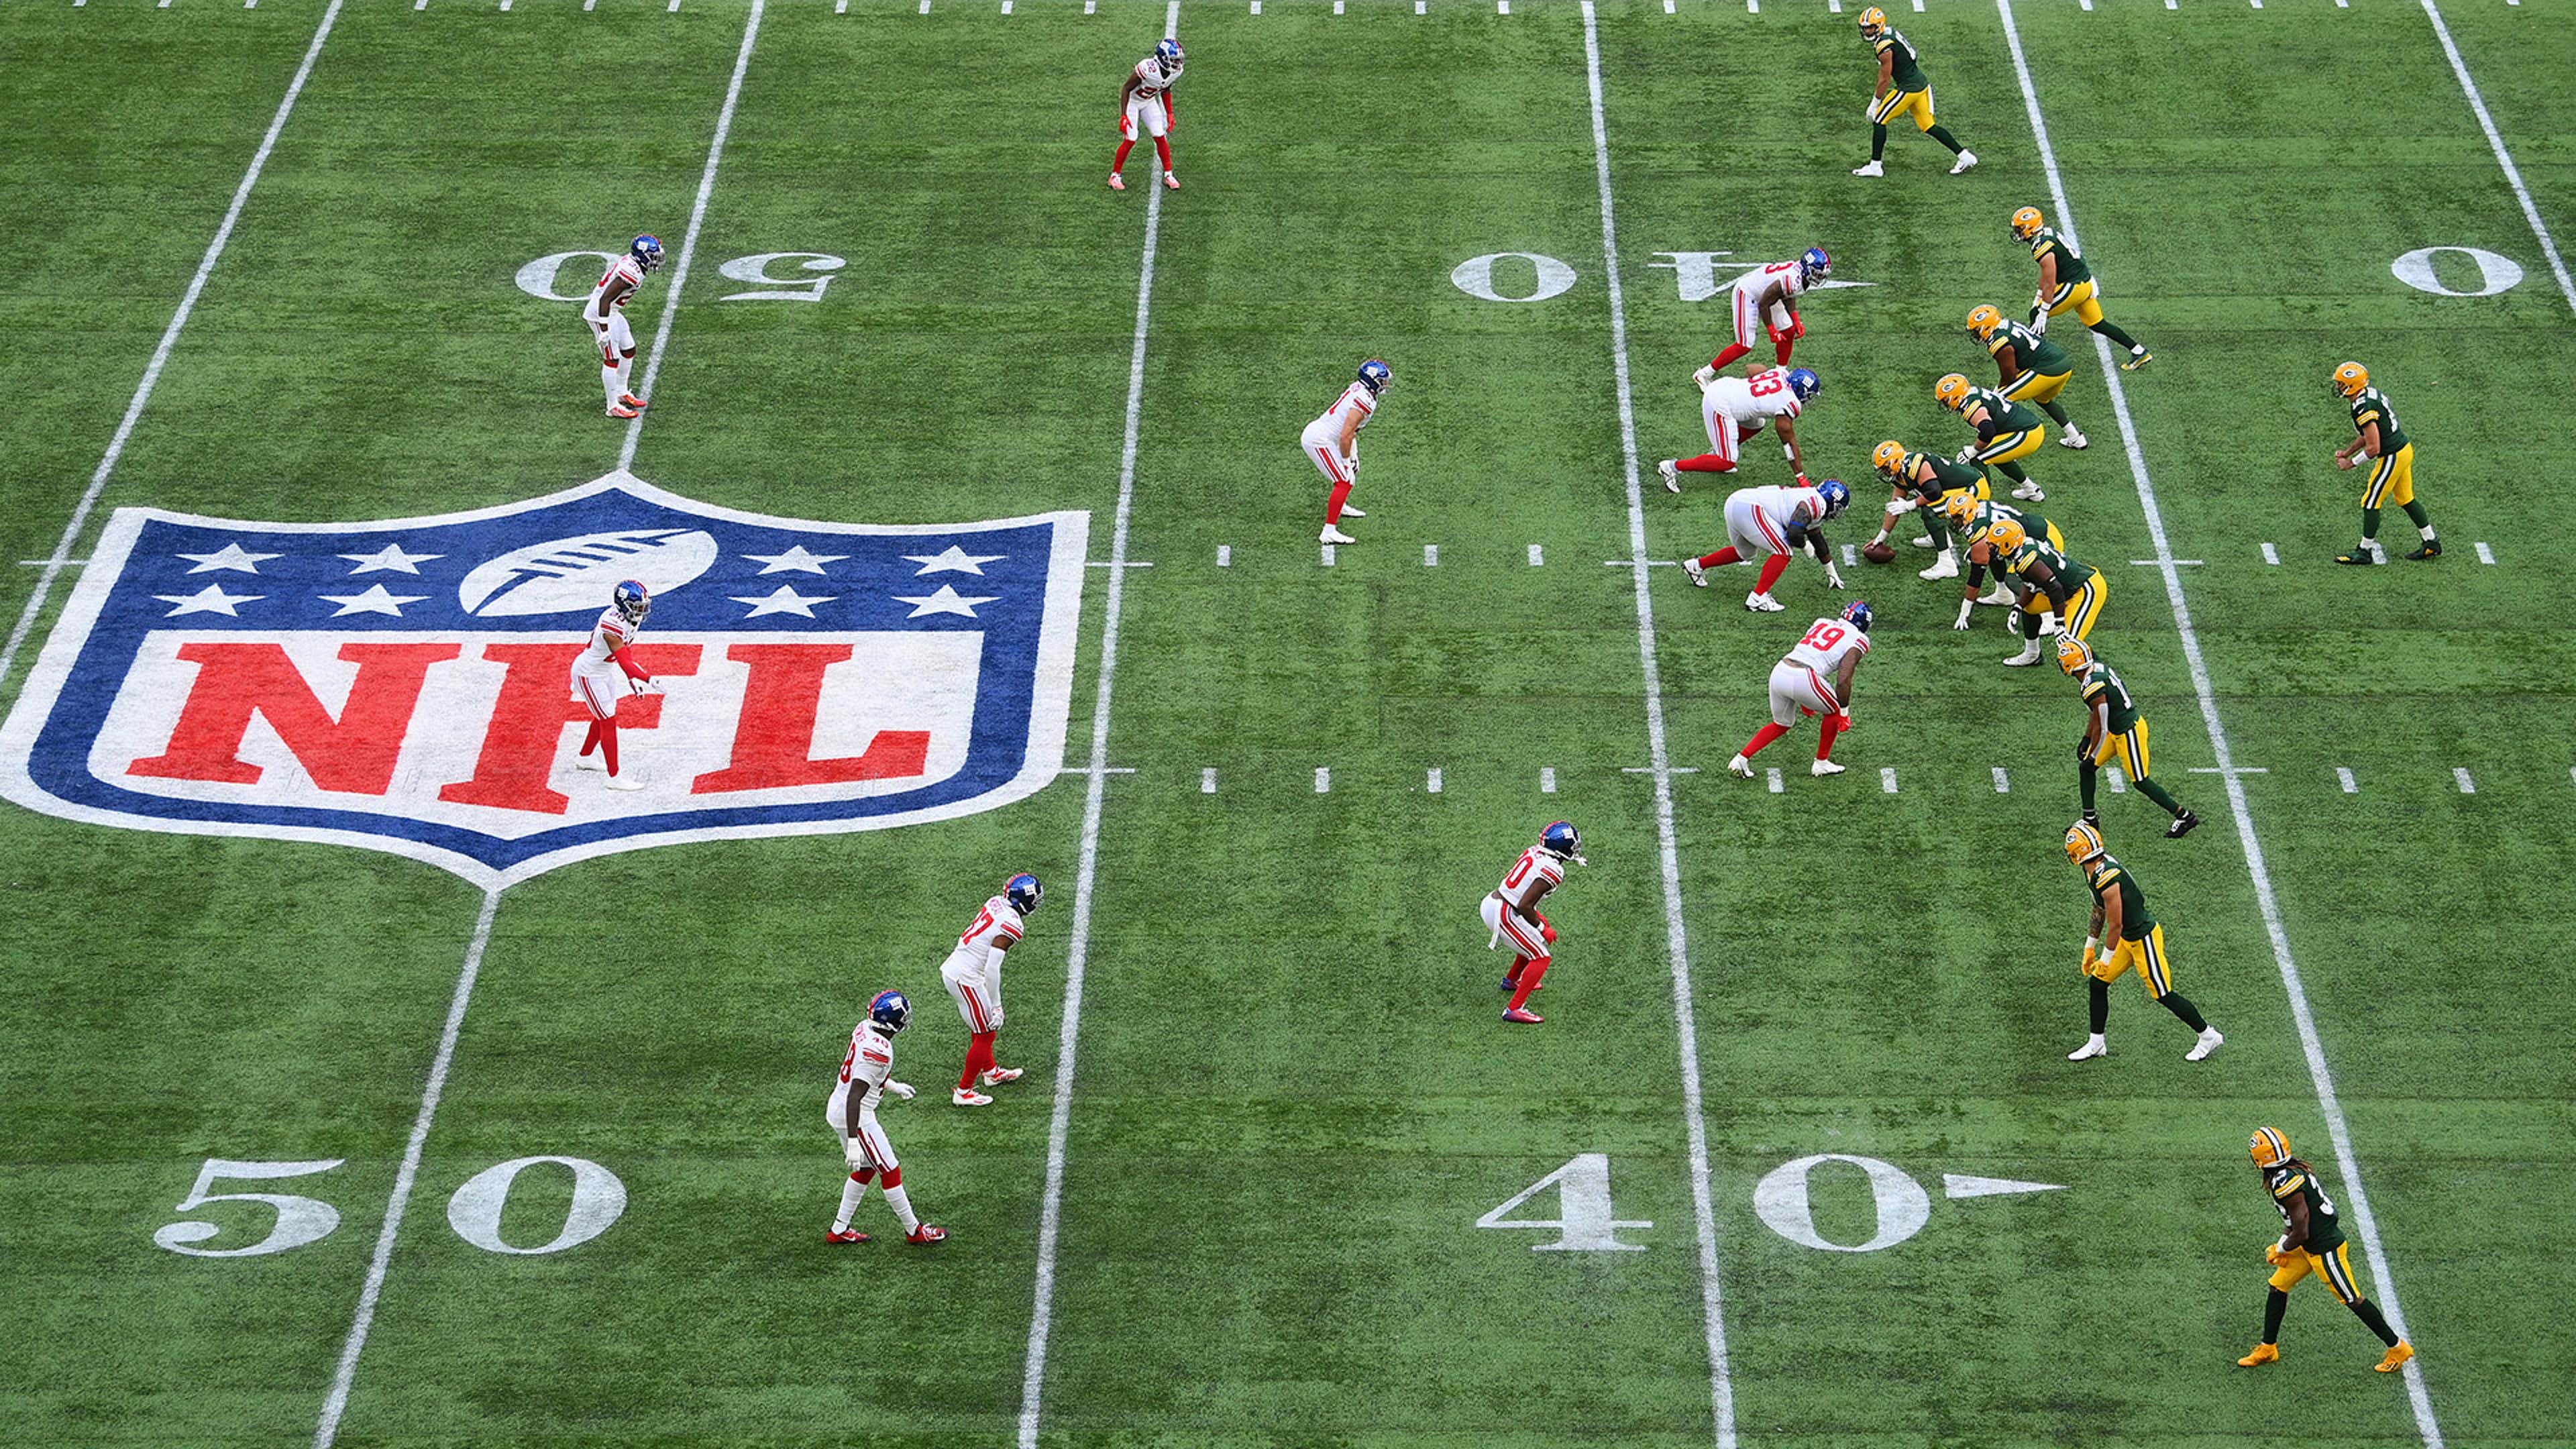 How to Watch Sunday Night Football Online Free: 2023 Live Stream